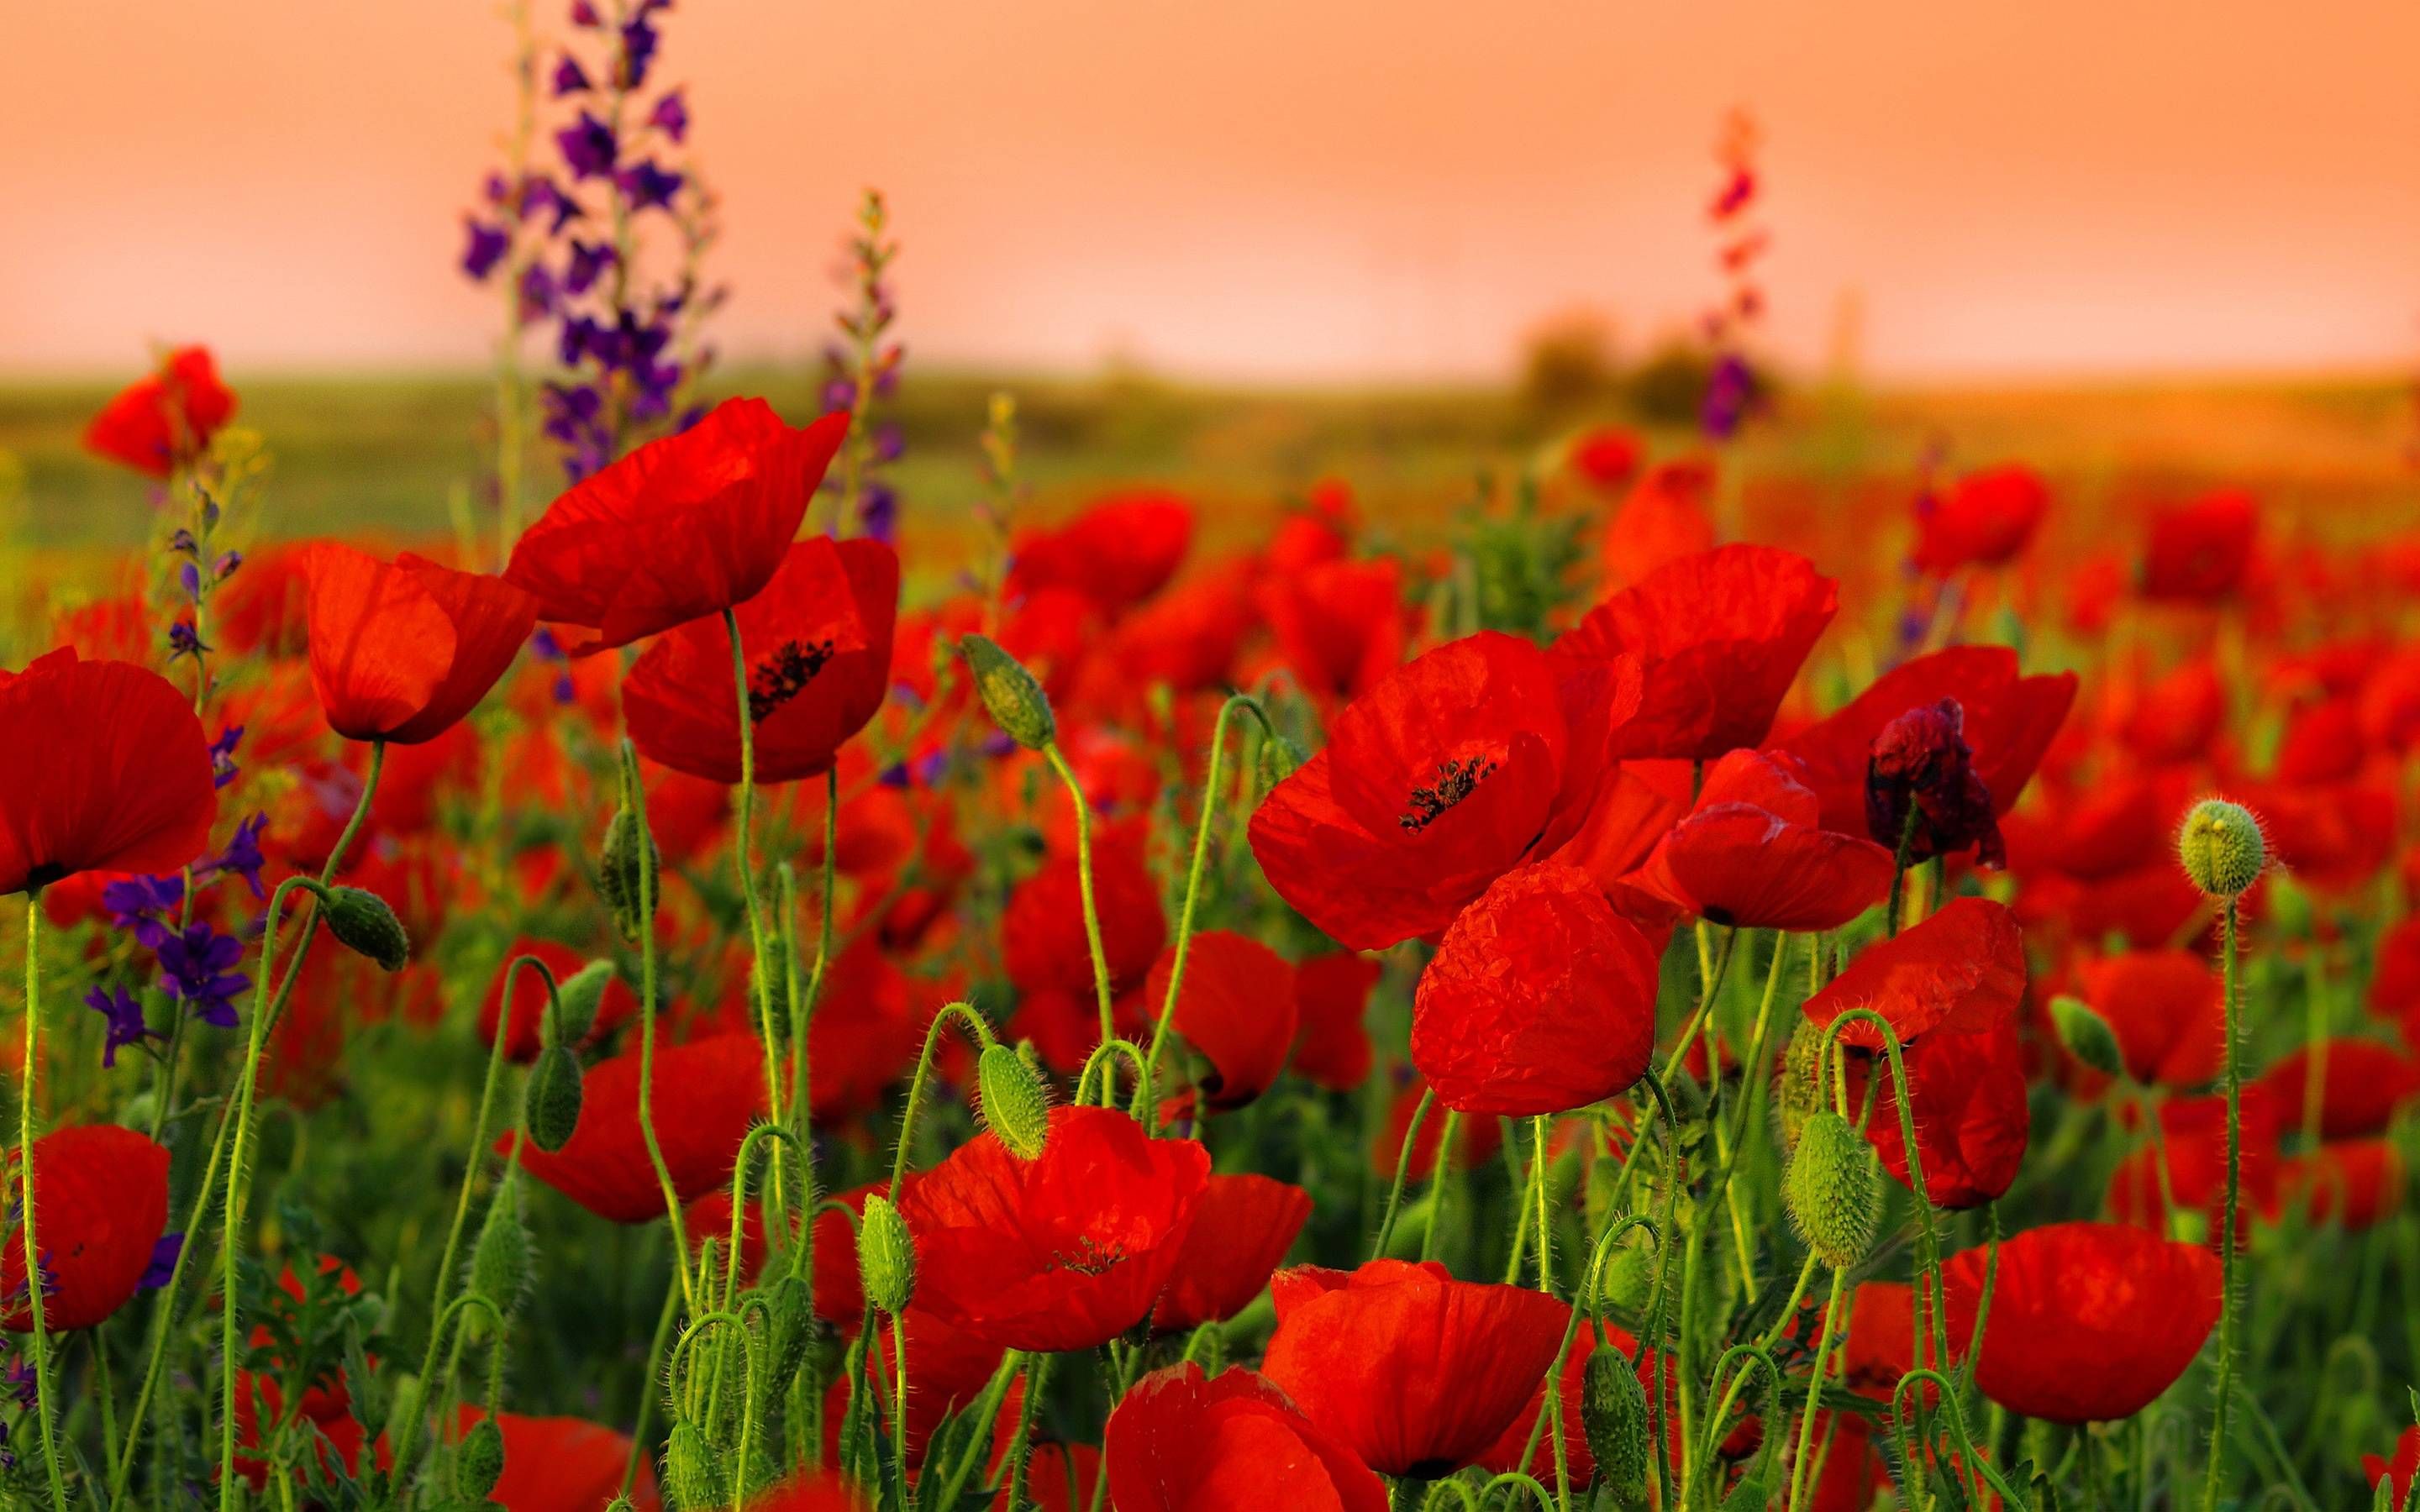 Red Poppy Wallpapers - Wallpaper Cave | Beautiful | Pinterest ...